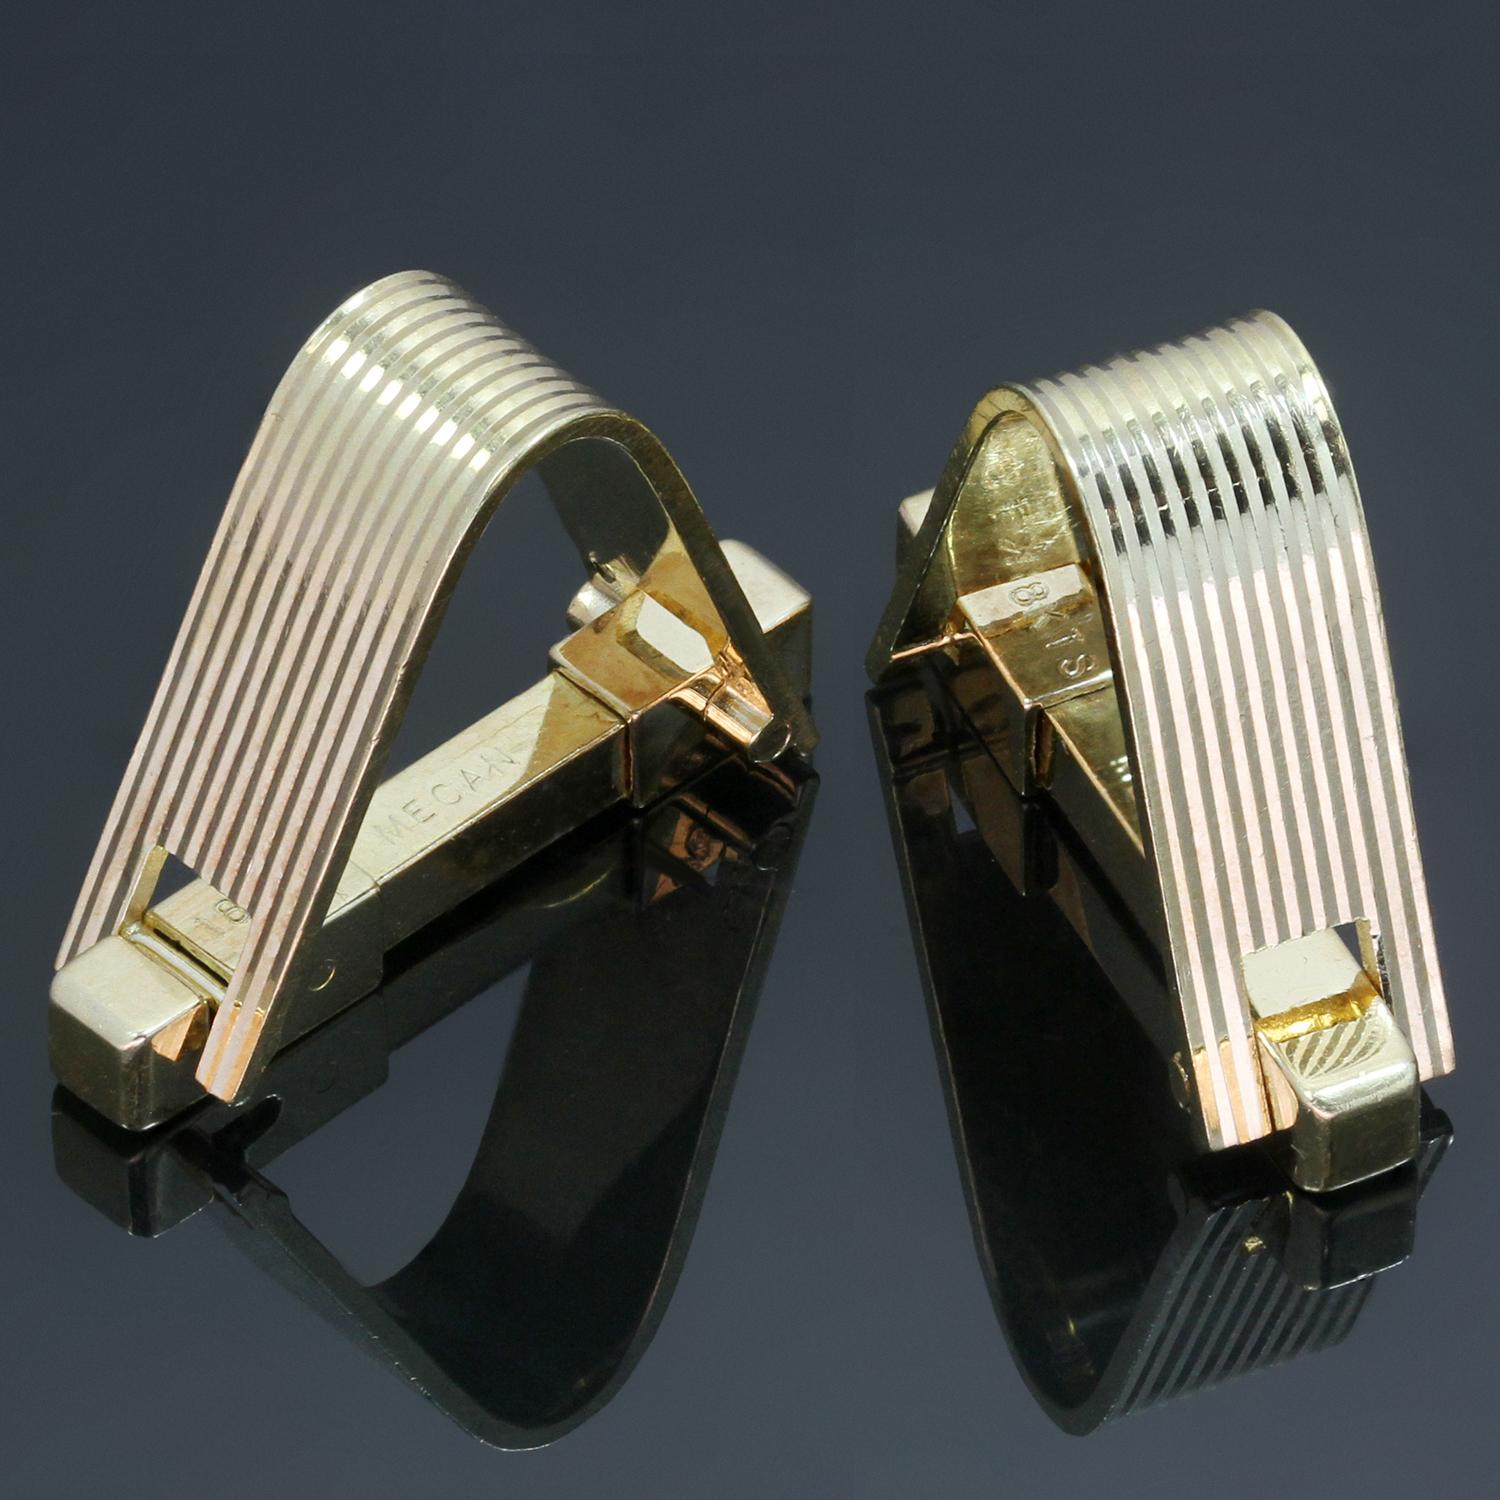 These vintage Mauboussin cufflinks feature the classic stirrup design crafted in 18k yellow gold. Made in France circa 1950s. Measurements: 0.27